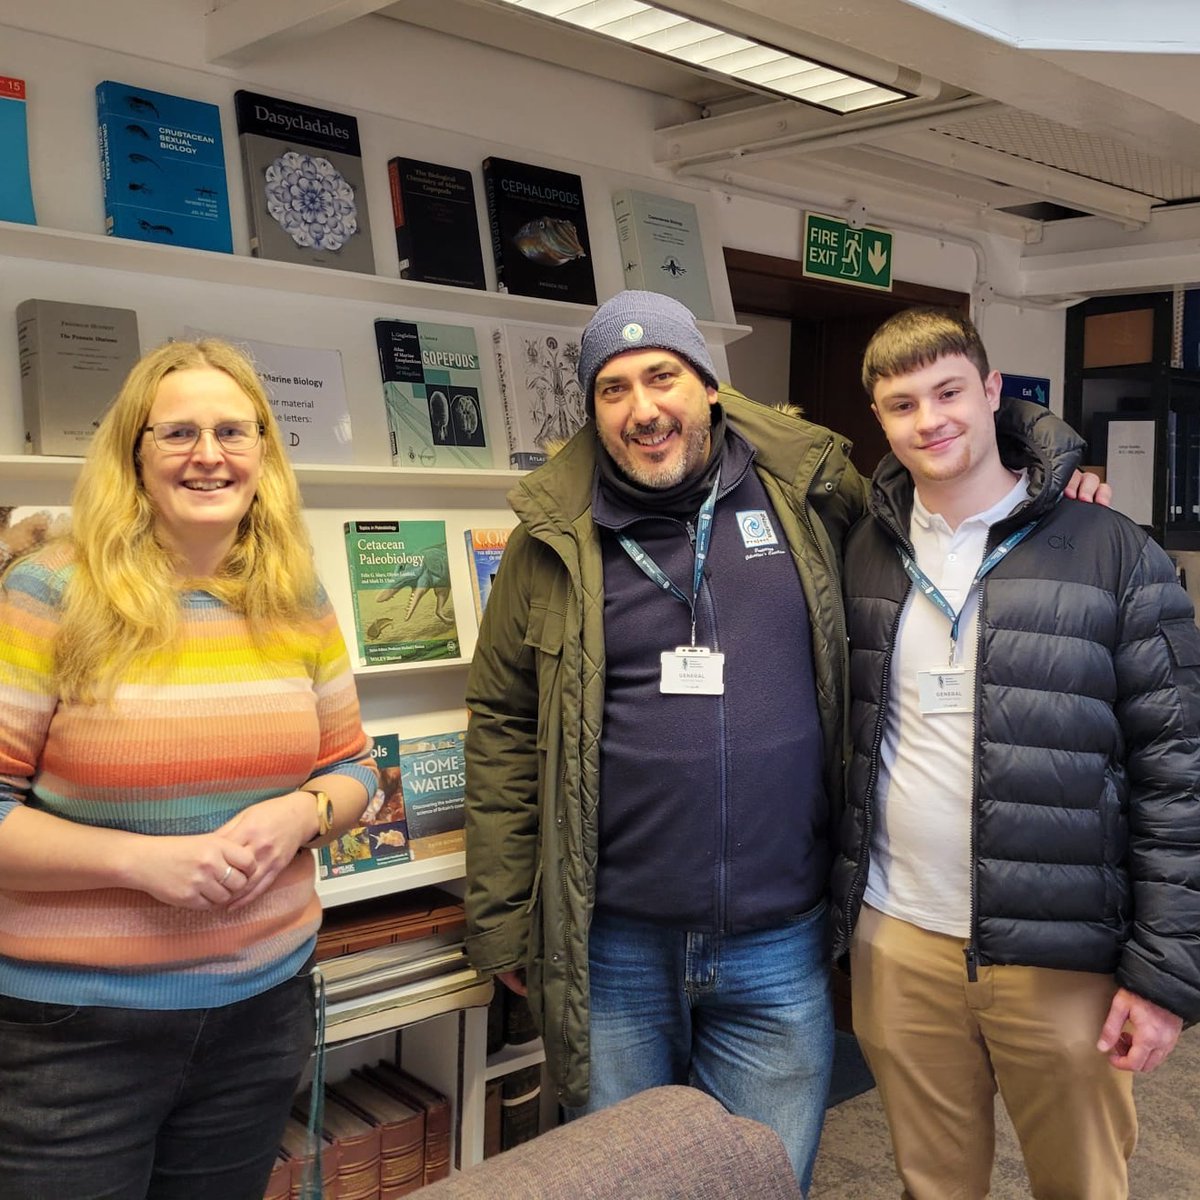 Nautilus Project visits the Marine Biological Association in Plymouth. The MBA organise youth summits, regularly attended by Nautilus members. The Association took the opportunity to donate books to the Nautilus Project’s Marine Science Library.